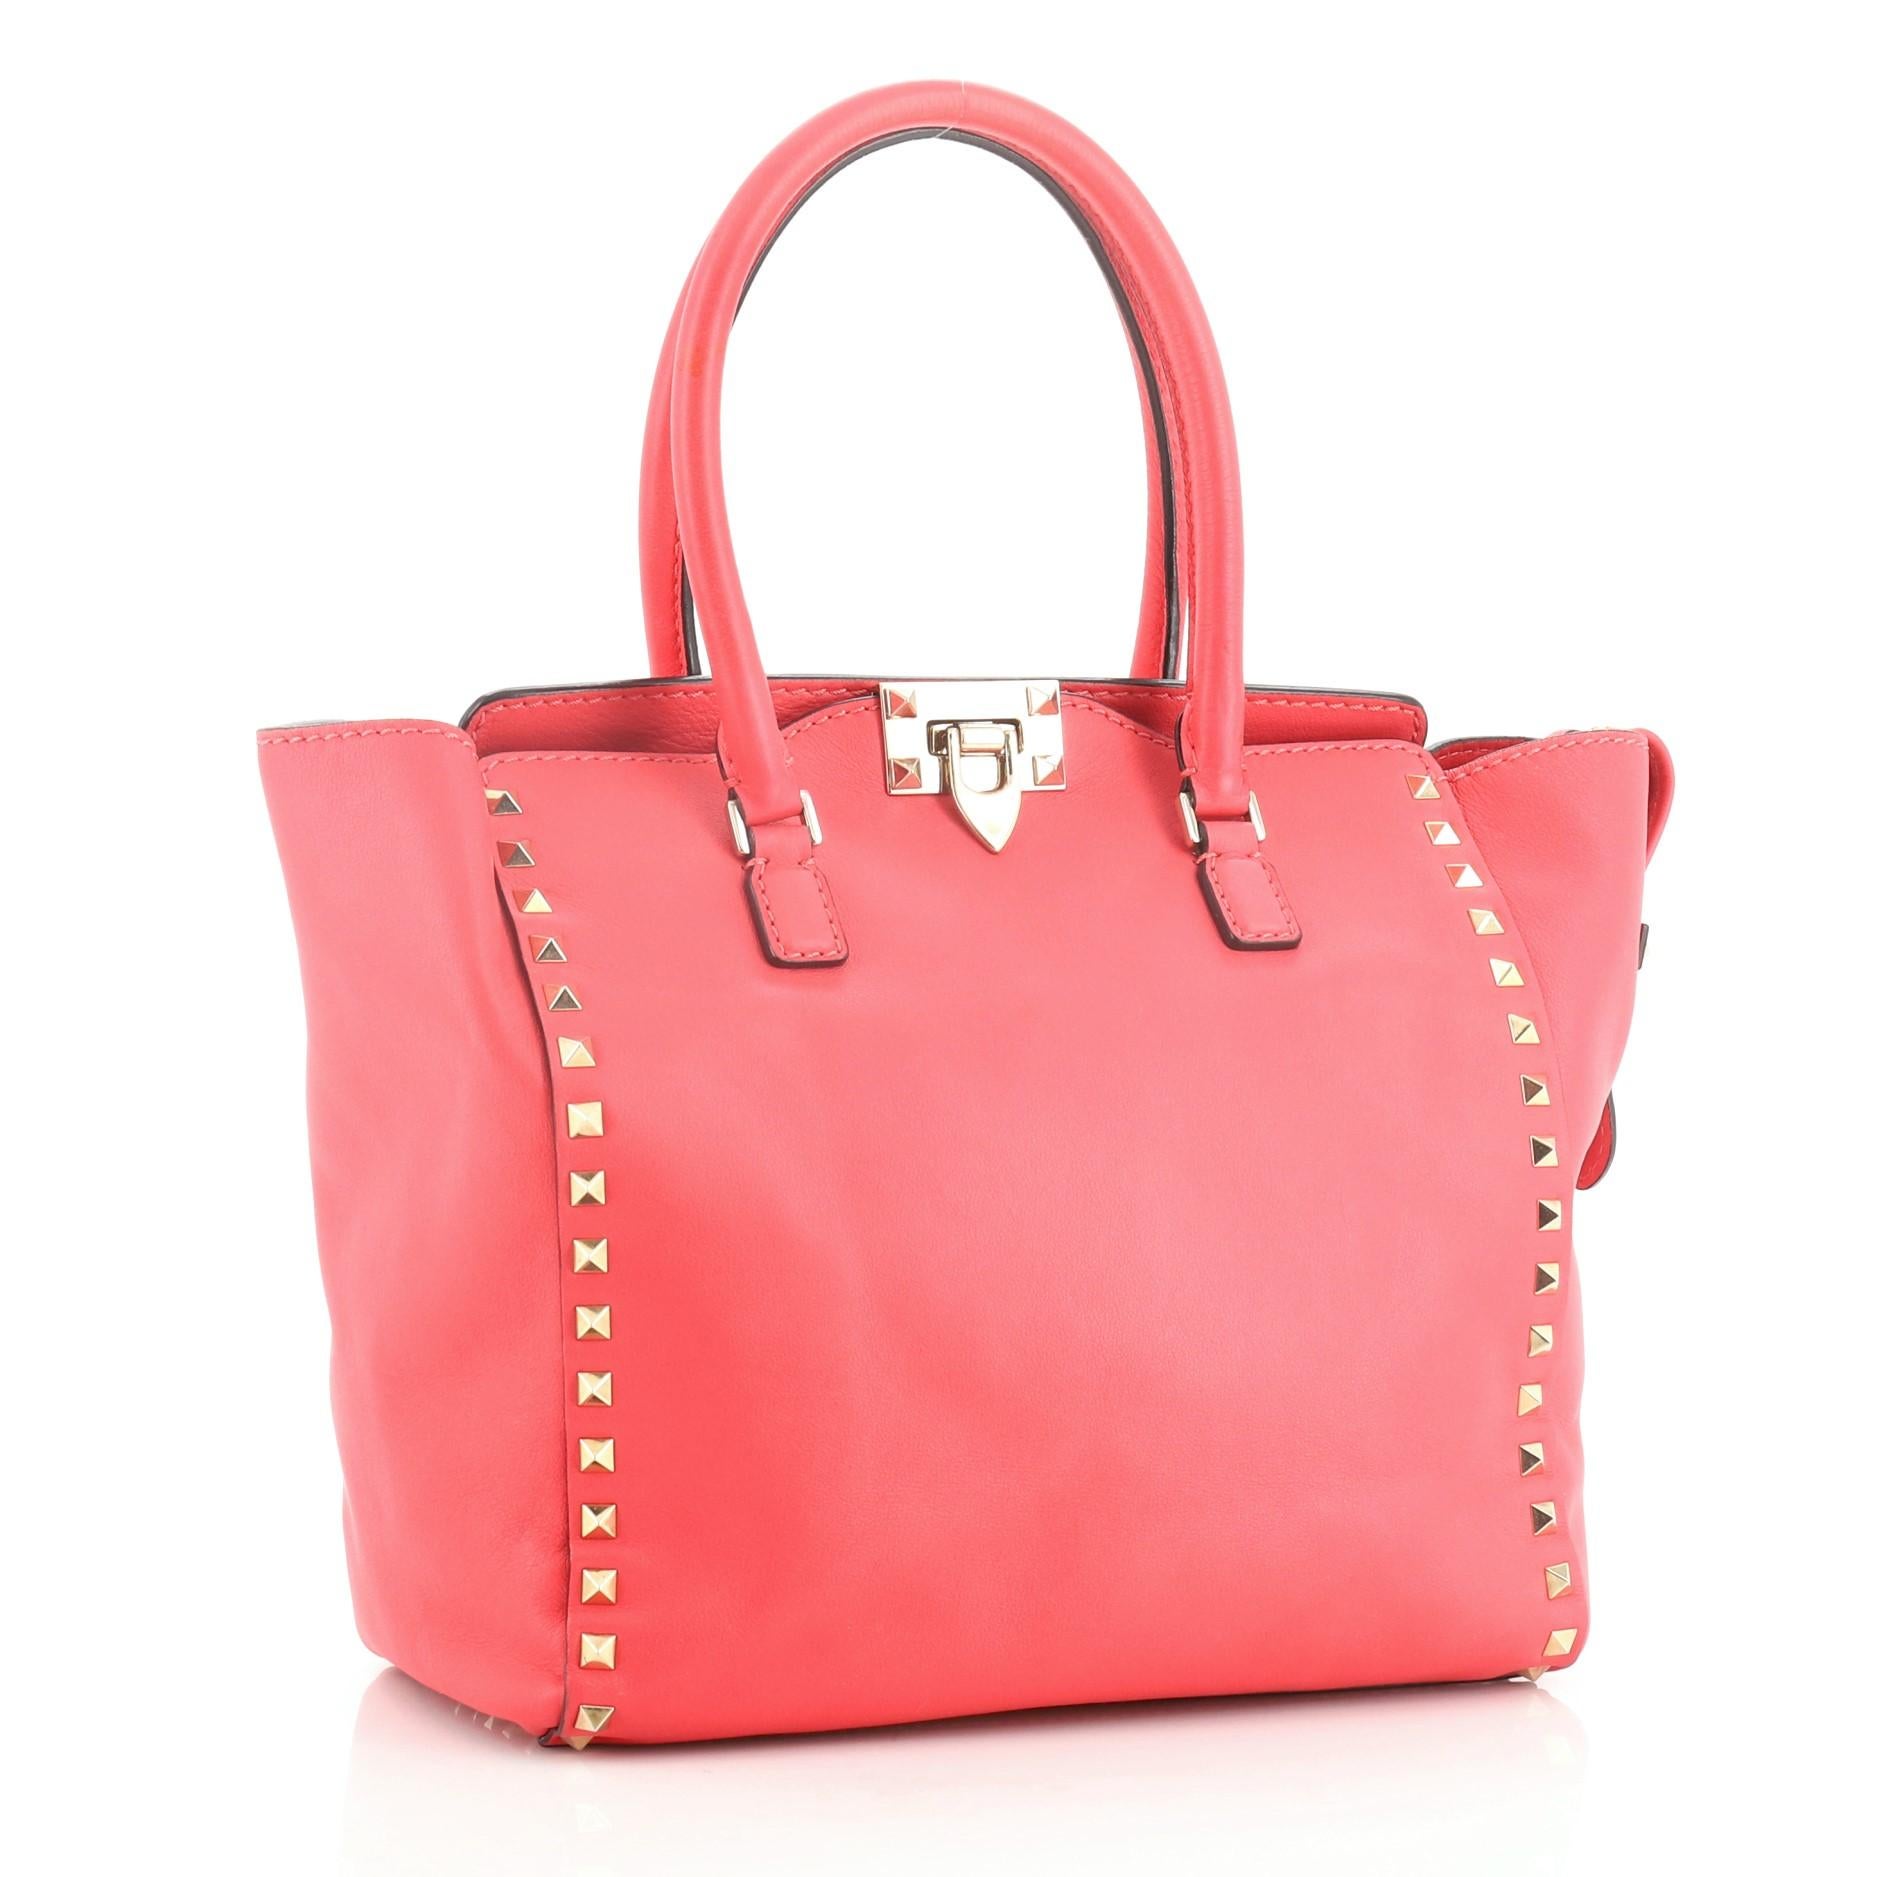 This Valentino Rockstud Tote Rigid Leather Medium, crafted from pink leather, features signature pyramid stud border, dual-rolled handles, and gold-tone hardware. Its flip-clasp and top zip closures open to a neutral fabric interior with side zip